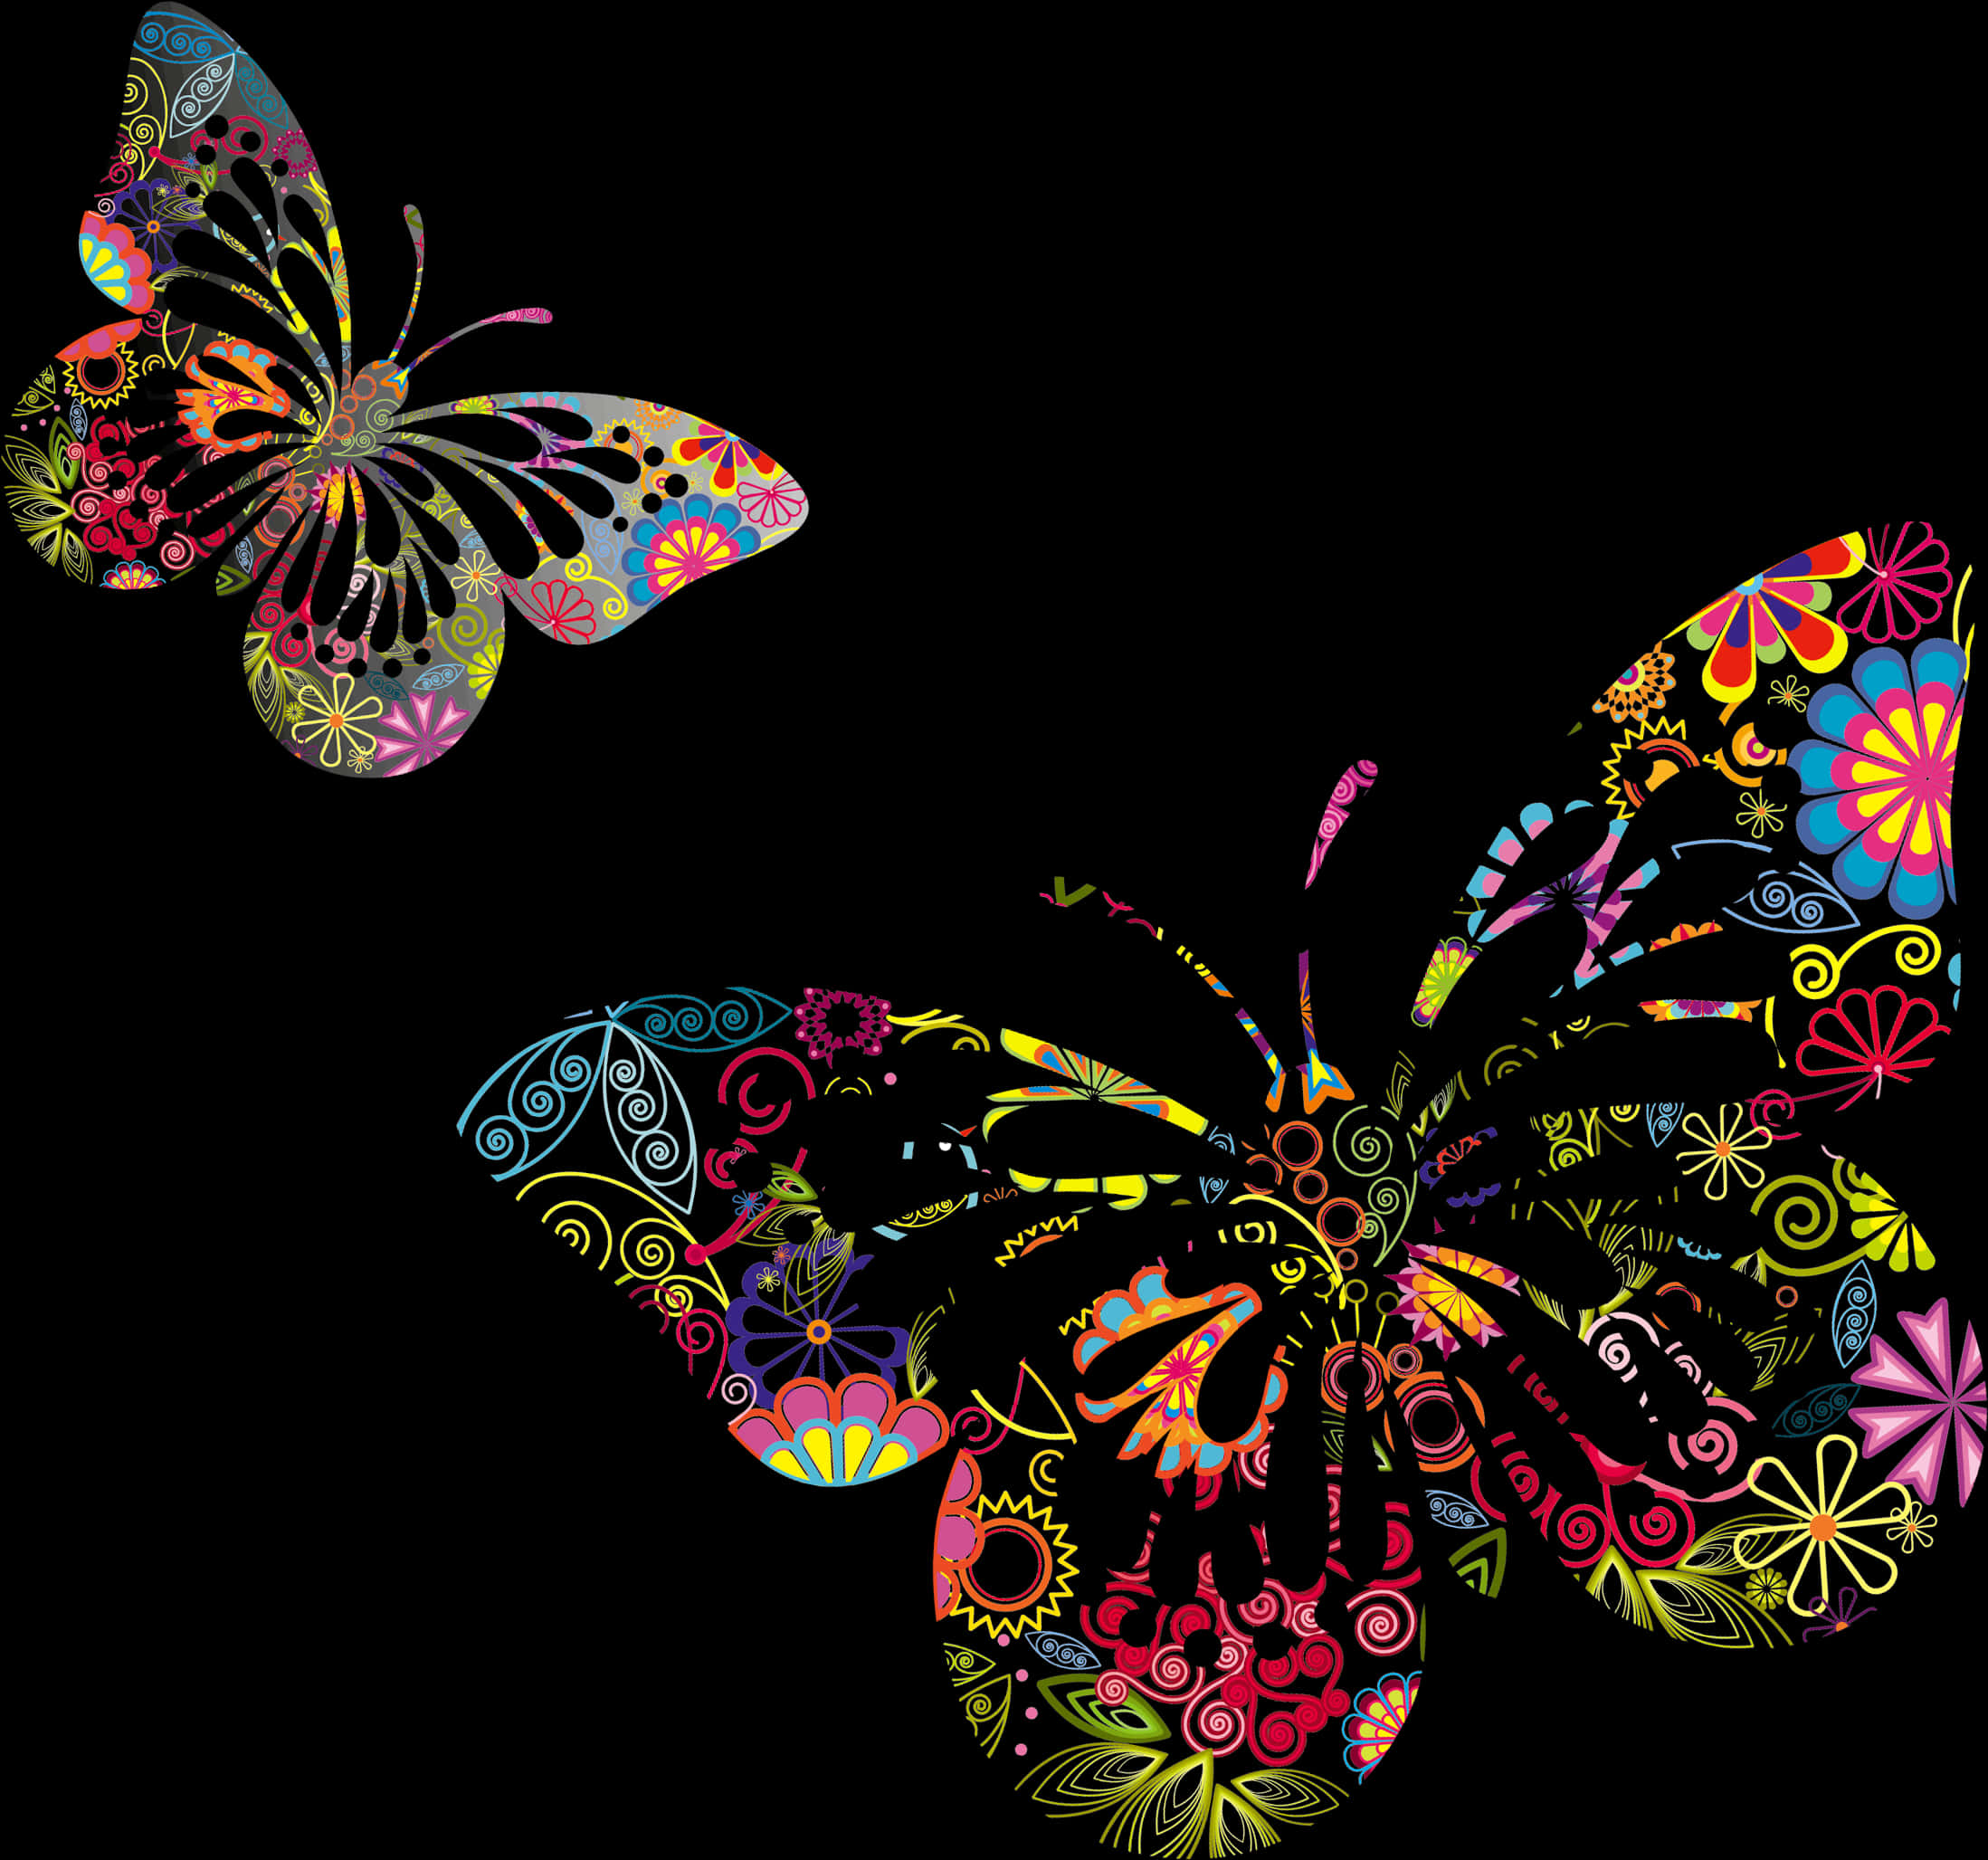 A Colorful Butterflies On A Black Background